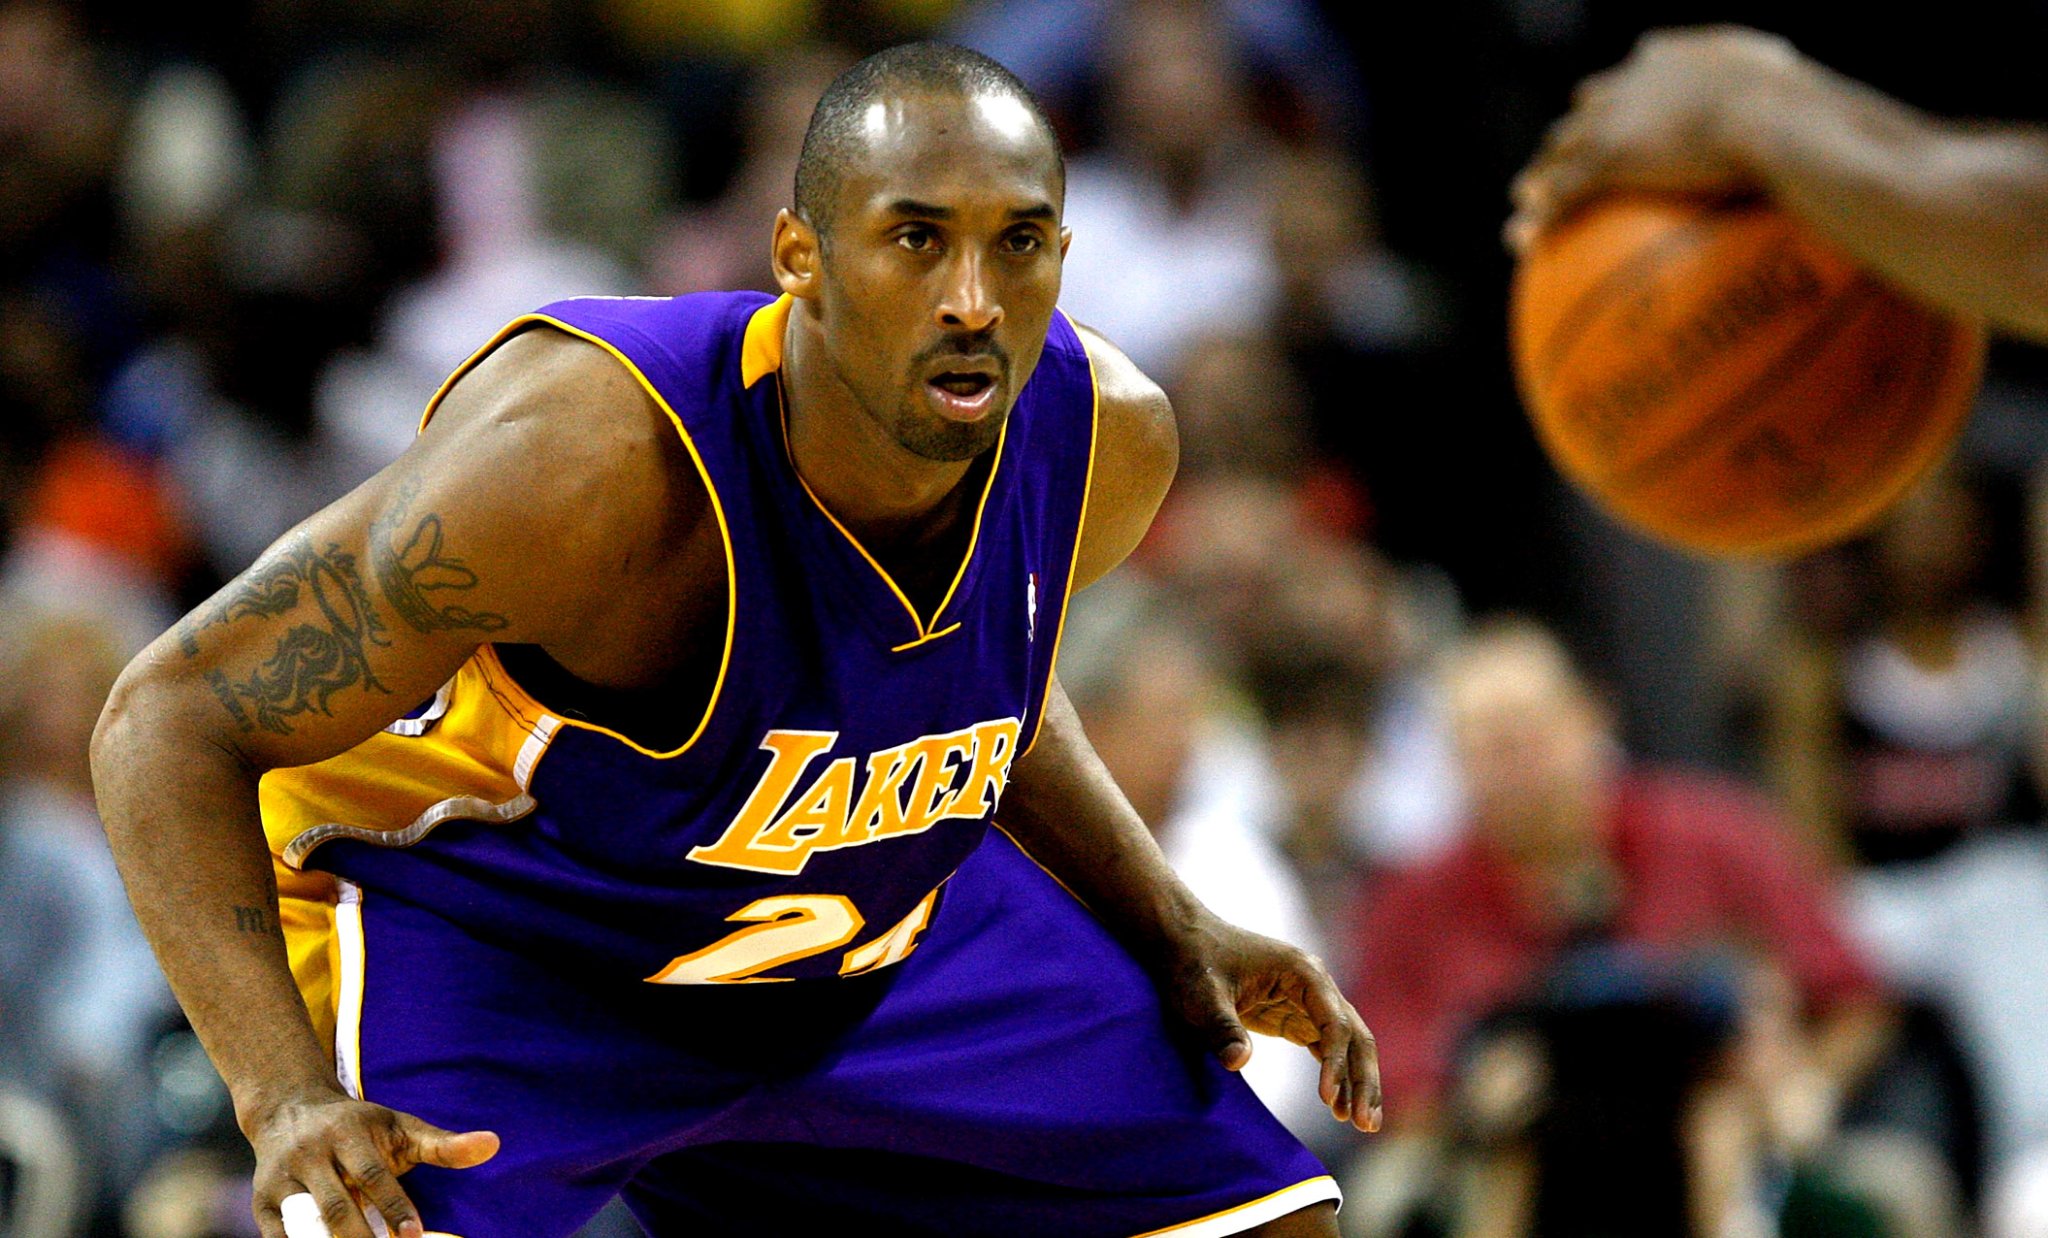 NBA Referee Zach Zarba Shares Story Confirming What A Savage Kobe Bryant Was On The Court